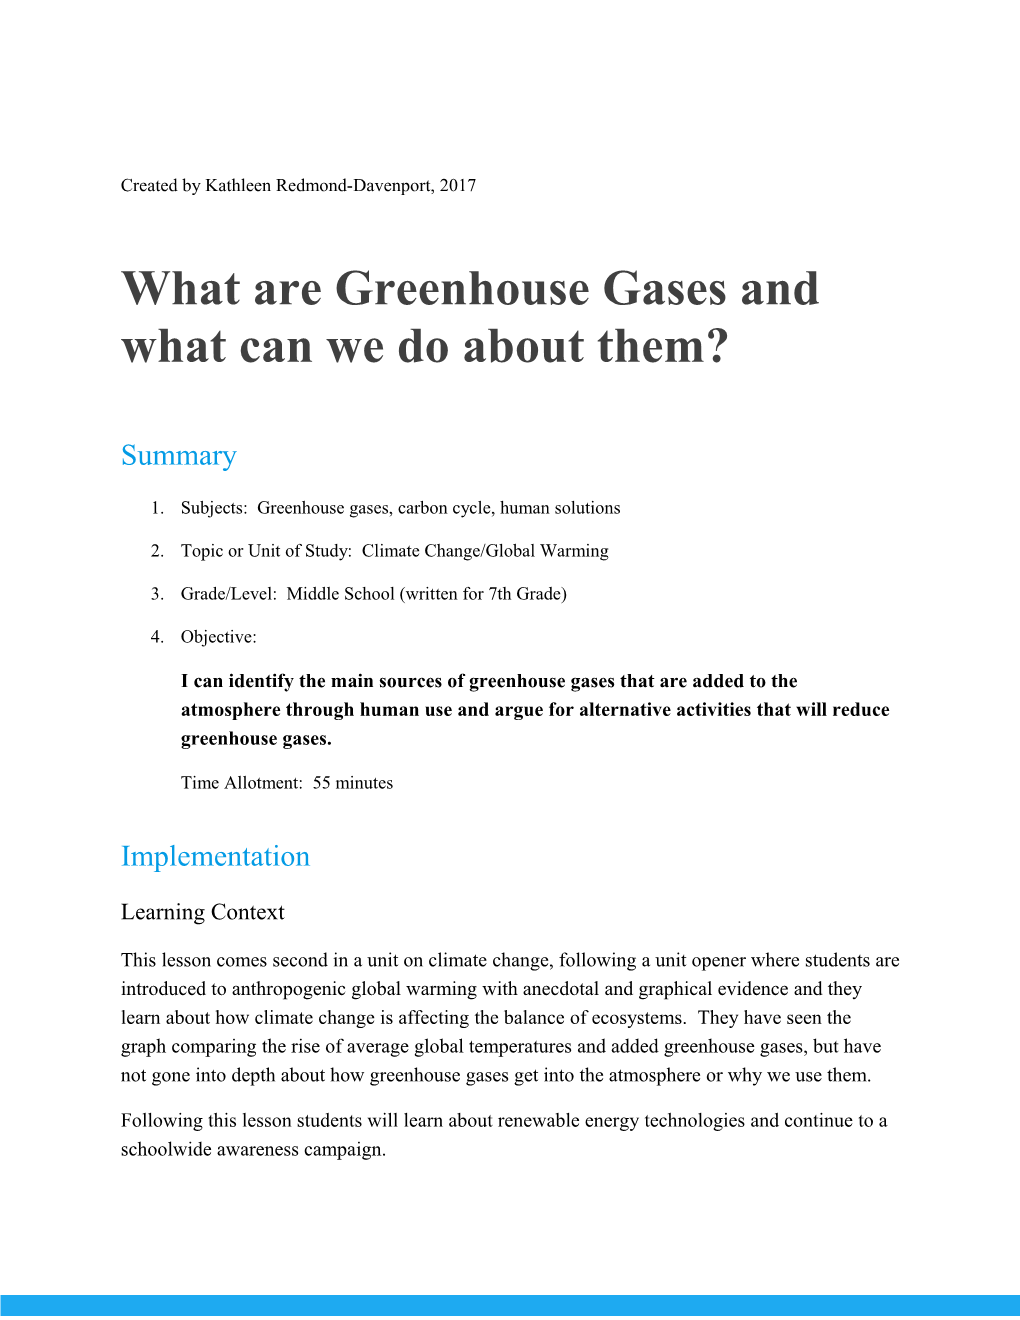 Summary 1. Subjects: Greenhouse Gases, Carbon Cycle, Human Solutions